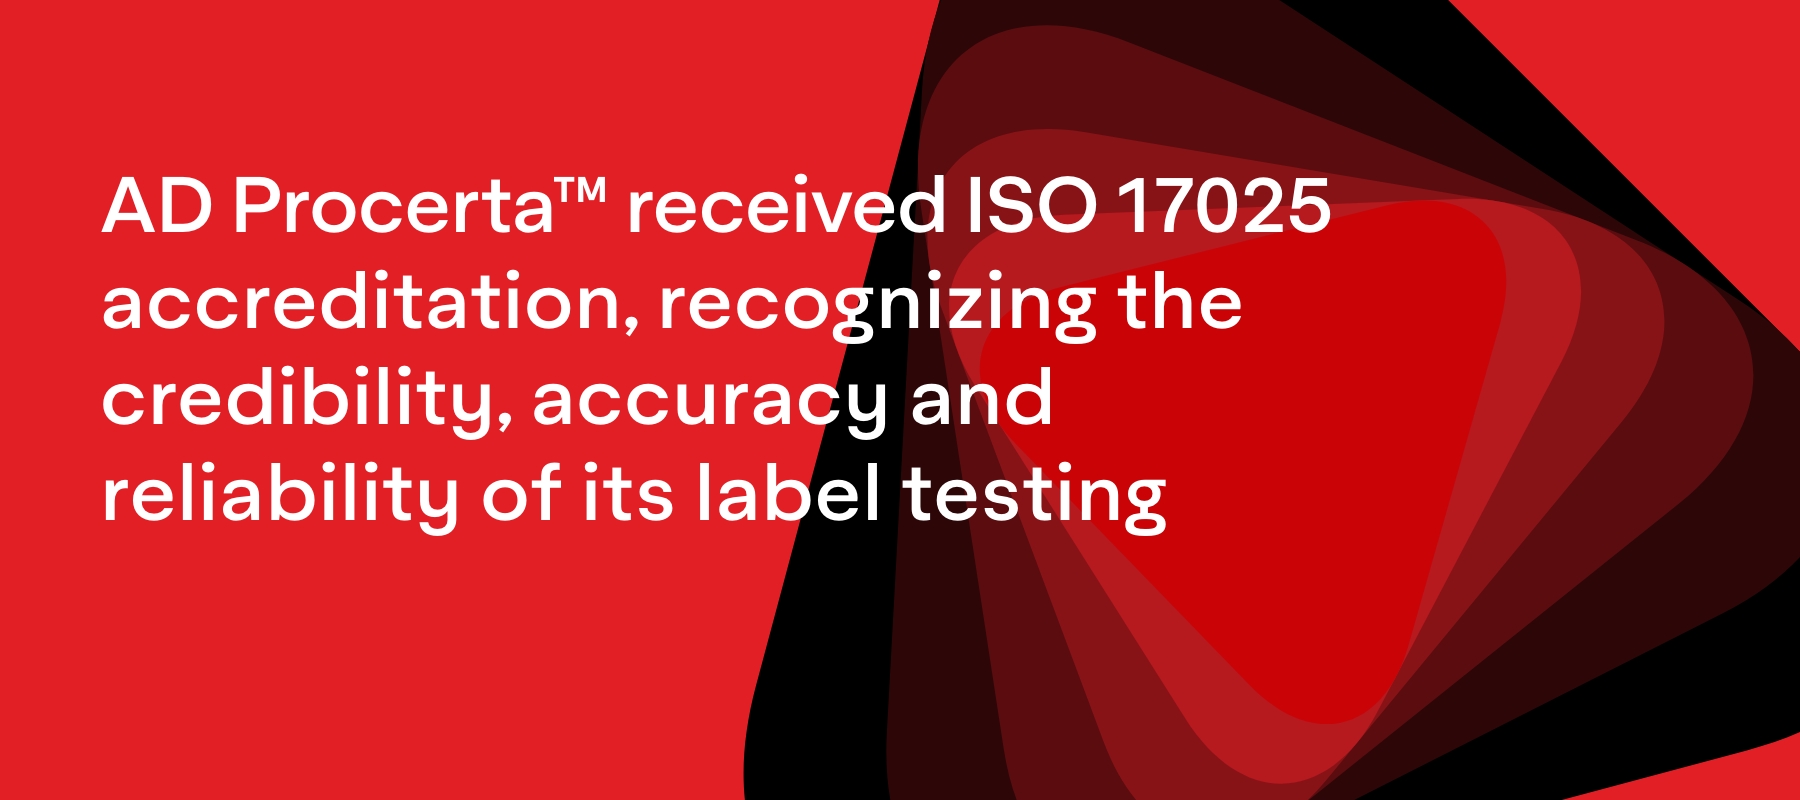 AD Procerta™ received ISO 17025 accreditation